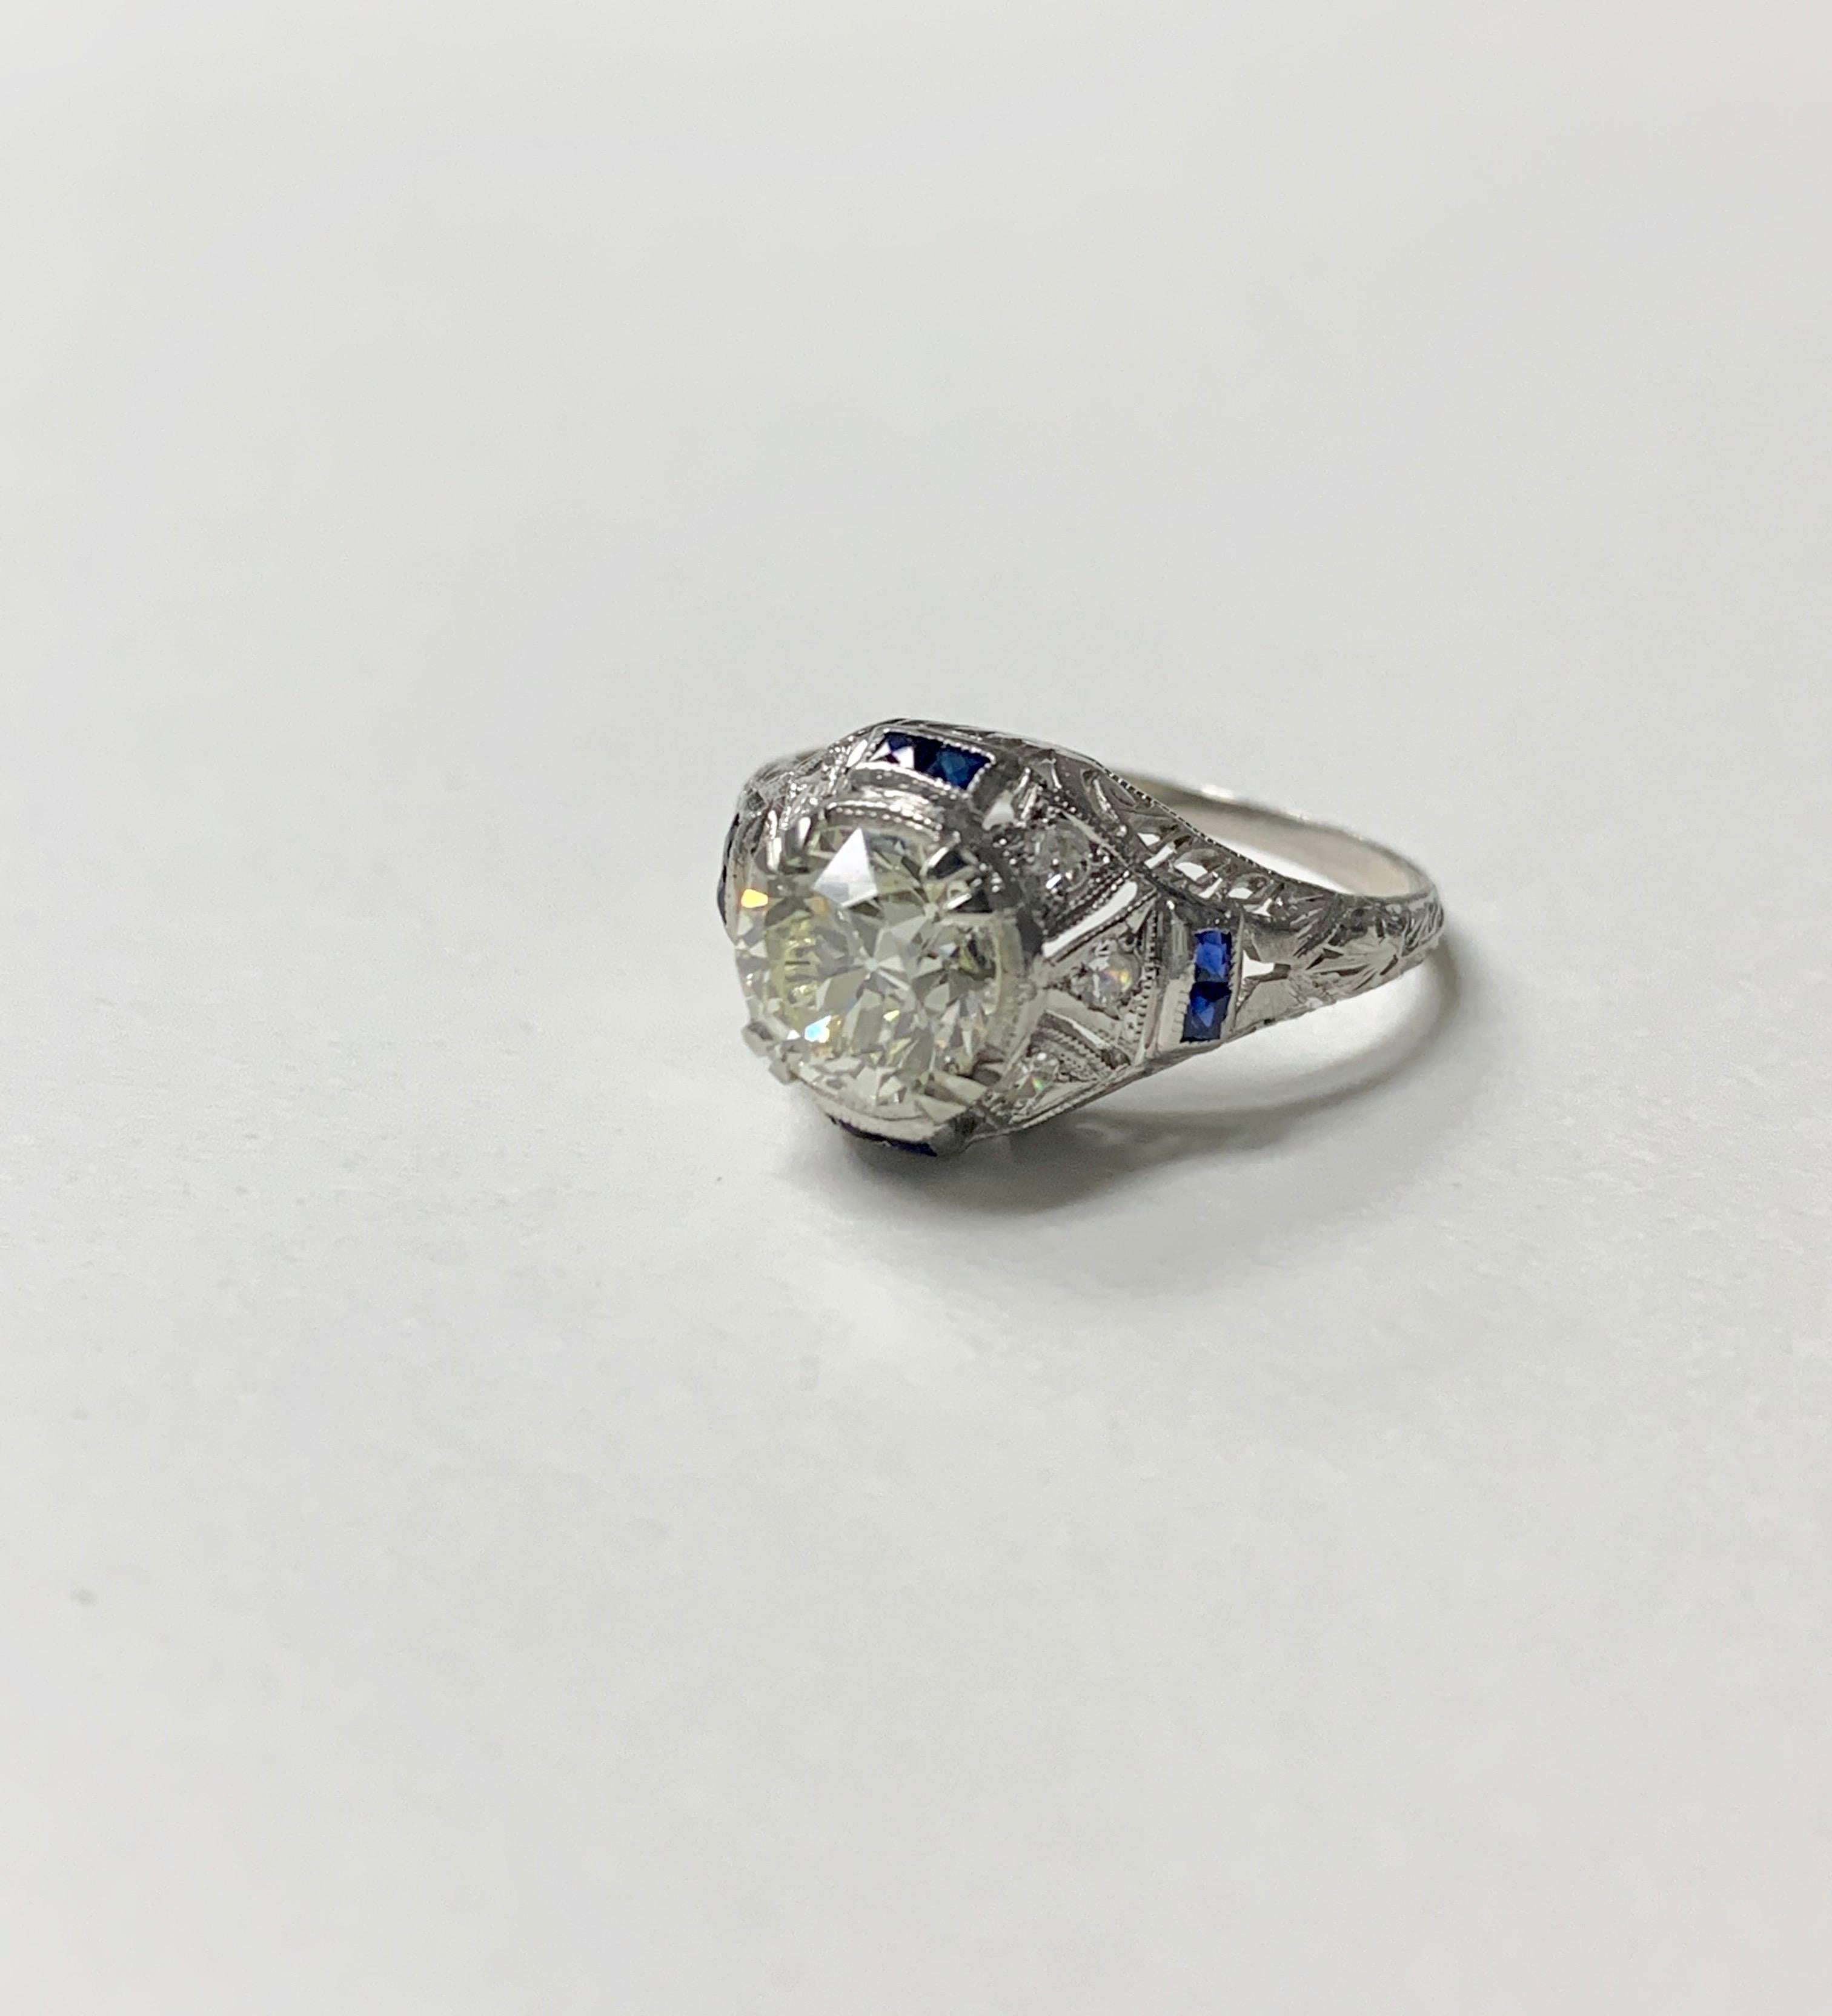 1920s Antique Old european cut diamond engagement ring in platinum. 
The details are as follows : 
Diamond weight : 1.35 carat ( J k color and VS clarity ) 
Metal : Platinum 
Ring Size : 4 3/4